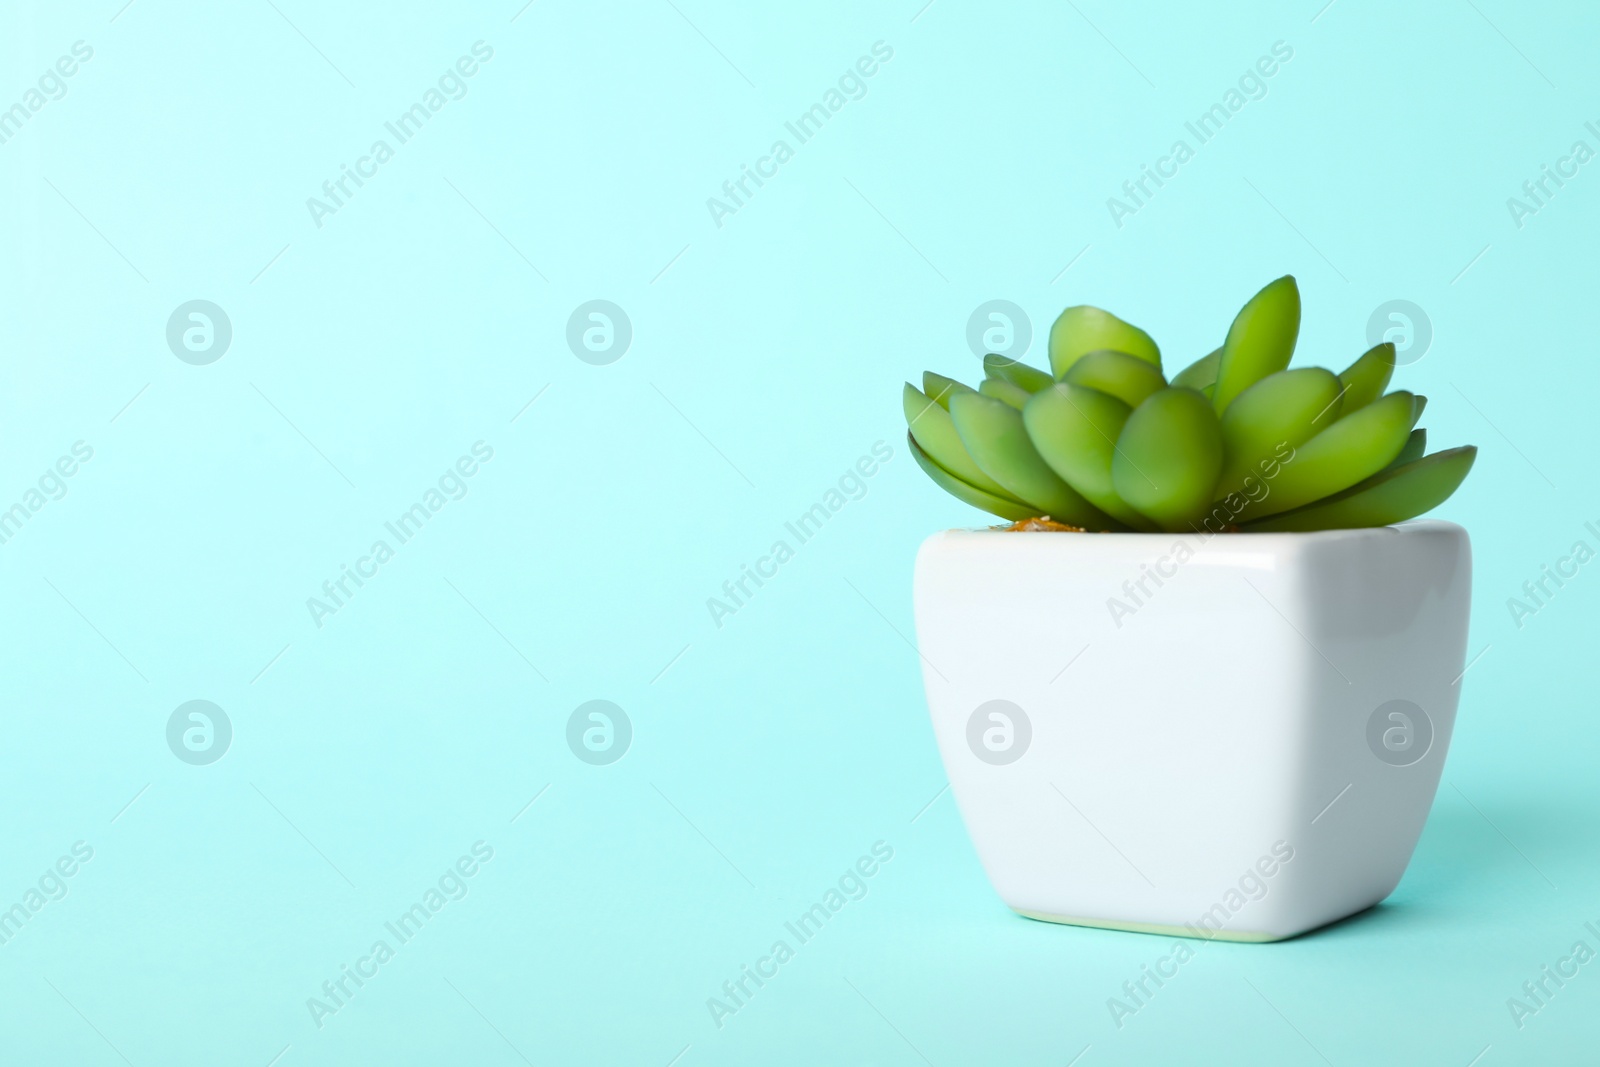 Photo of Artificial plant in flower pot on light blue background. Space for text